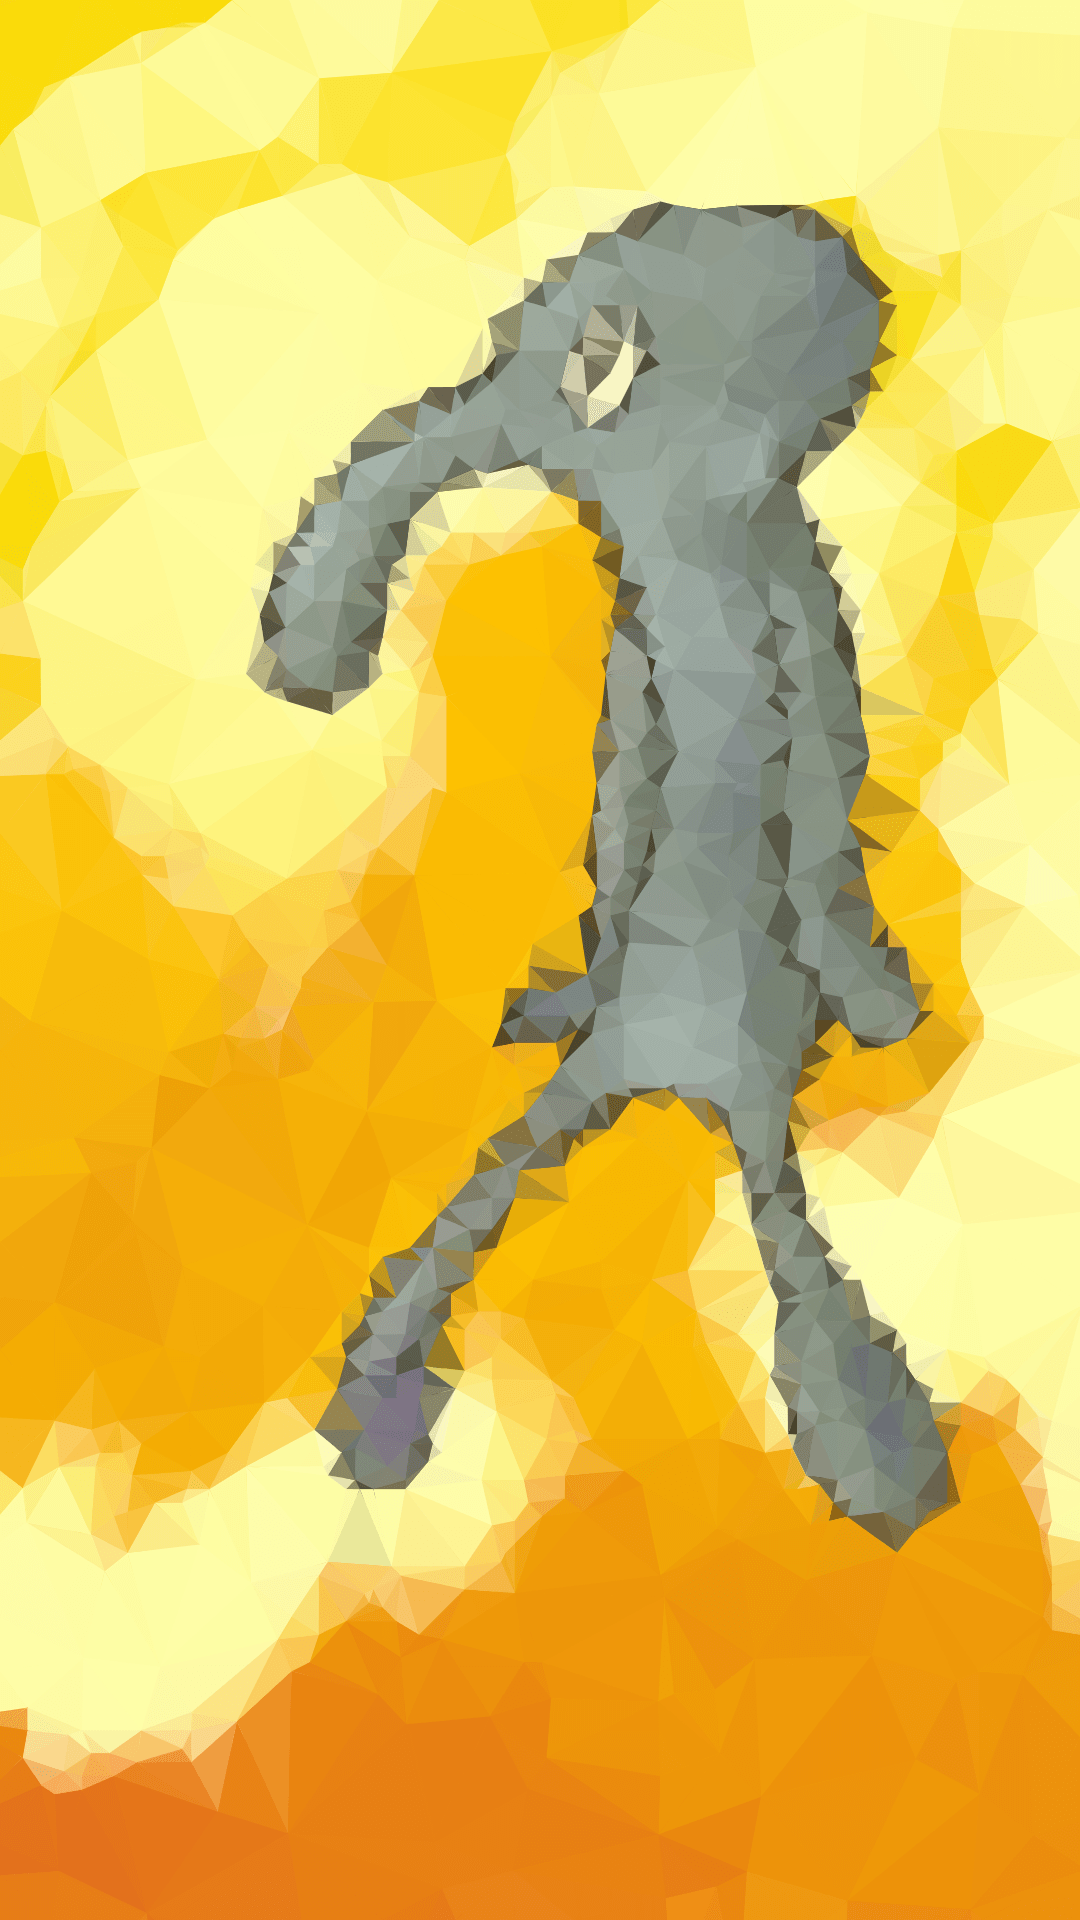 I made a low poly wallpaper of Squidward's Bold and Brash